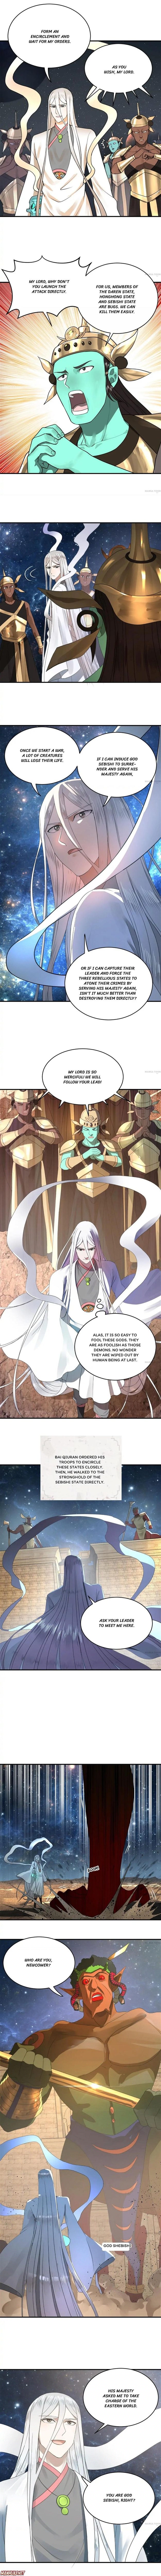 My Three Thousand Years to the Sky Chapter 137 page 4